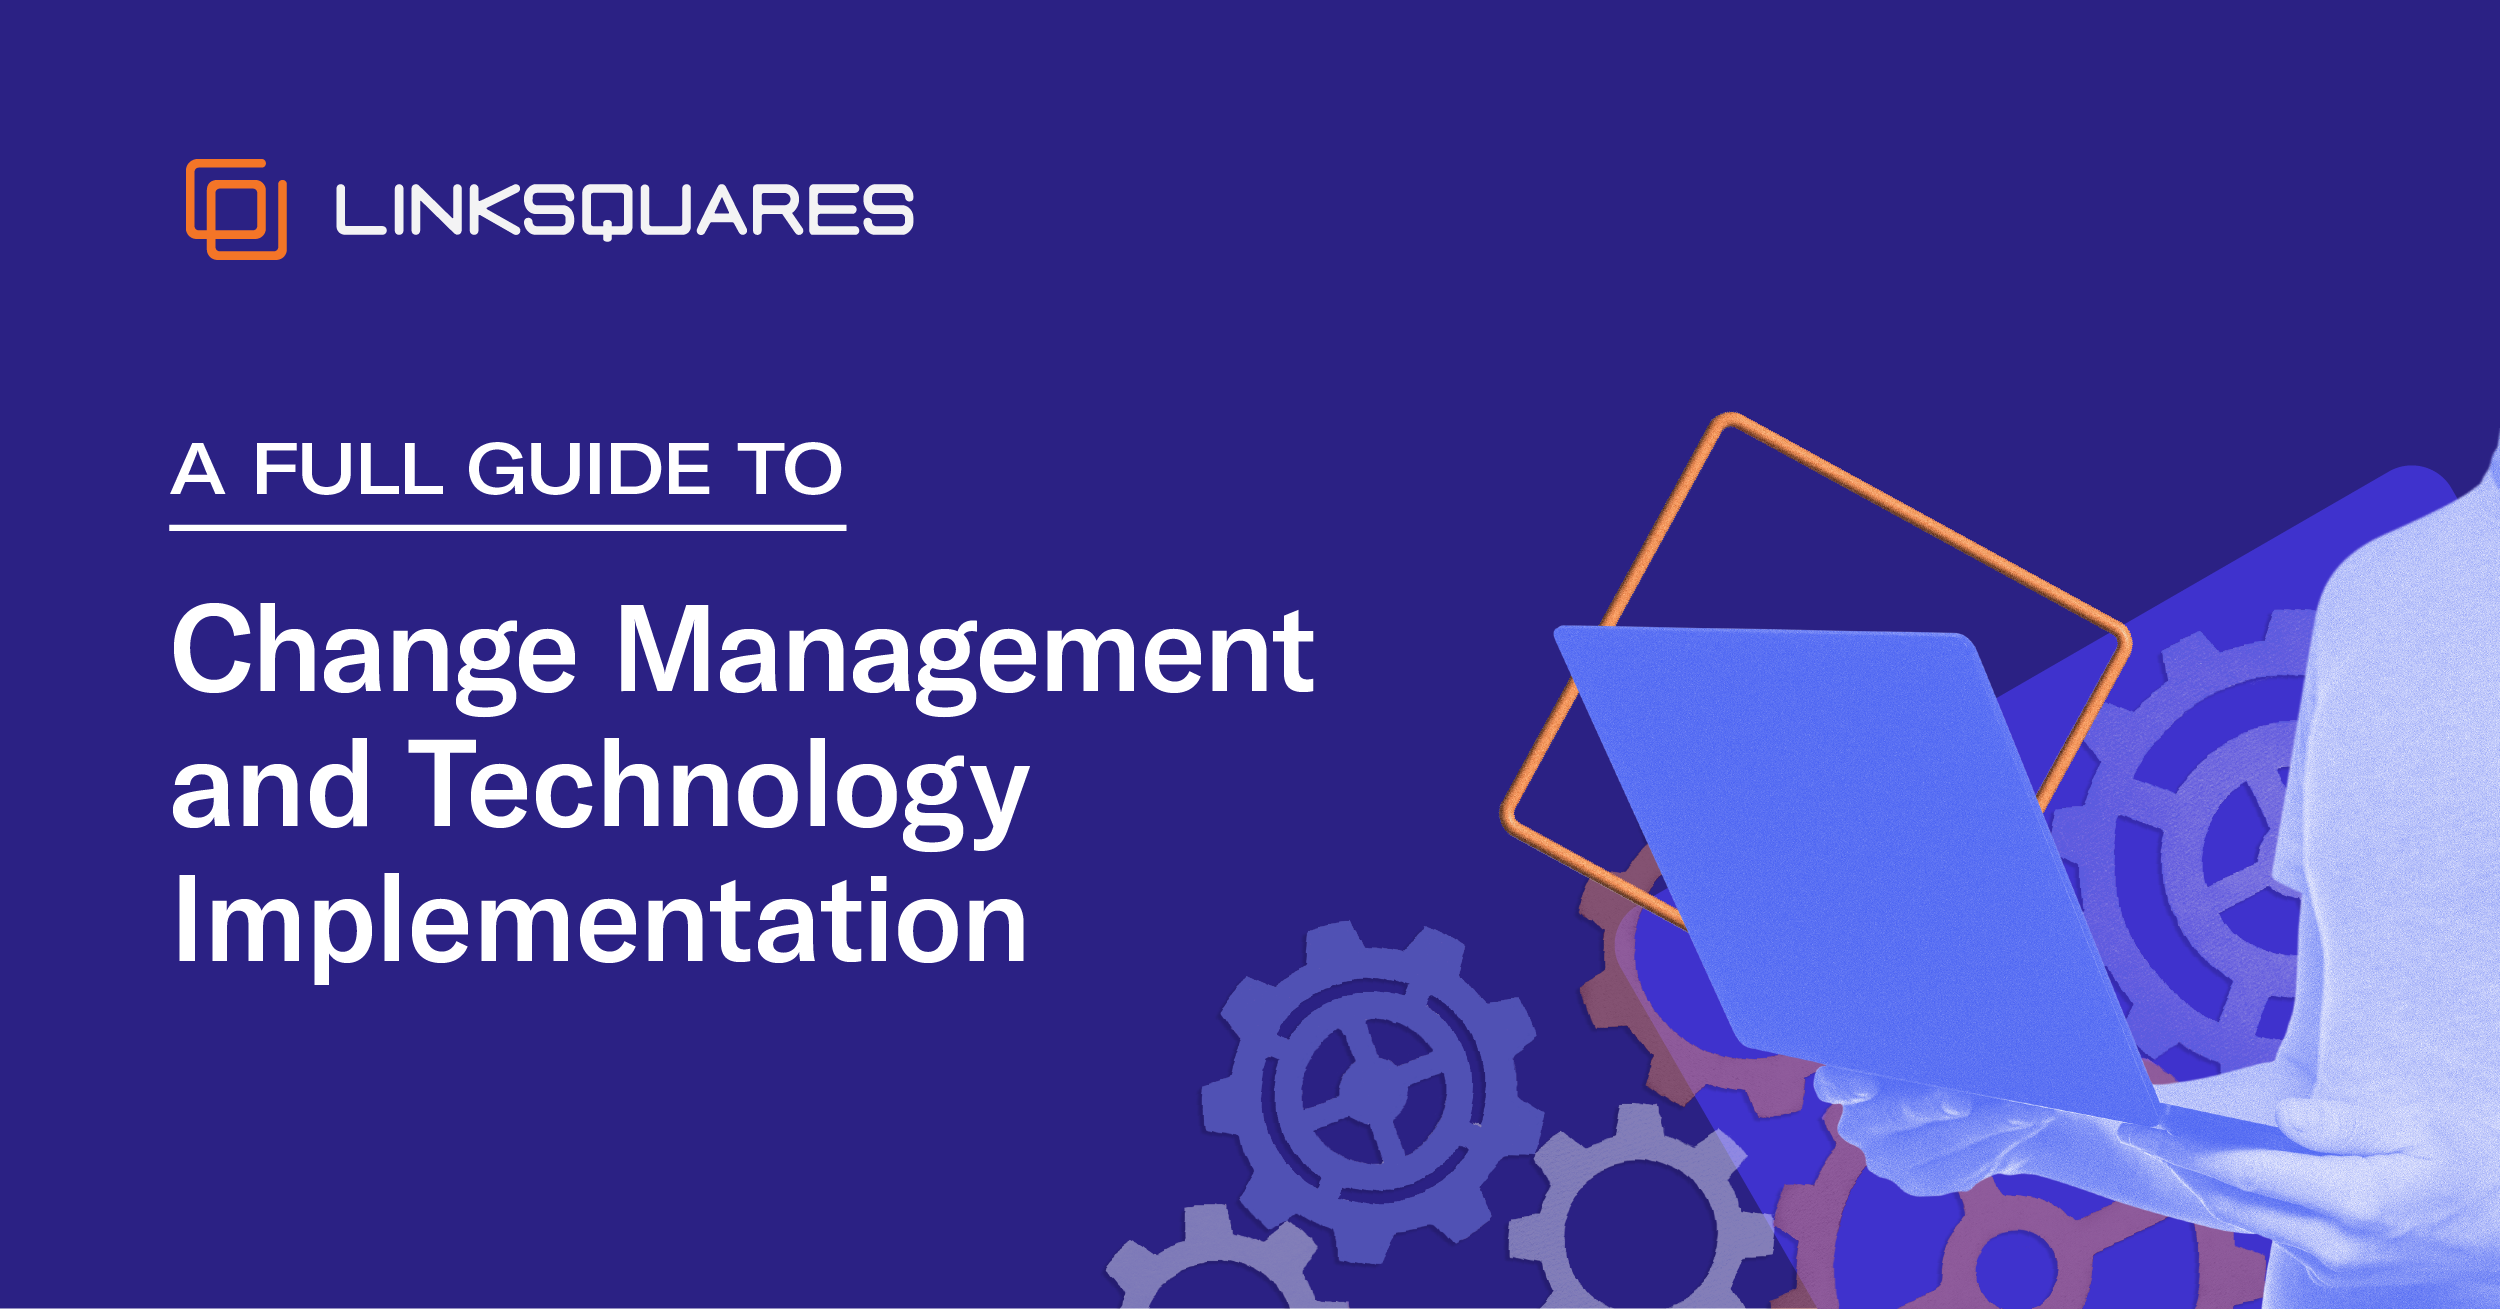 eBook: Full Guide to Change Management and Technology Implementation Listing Page